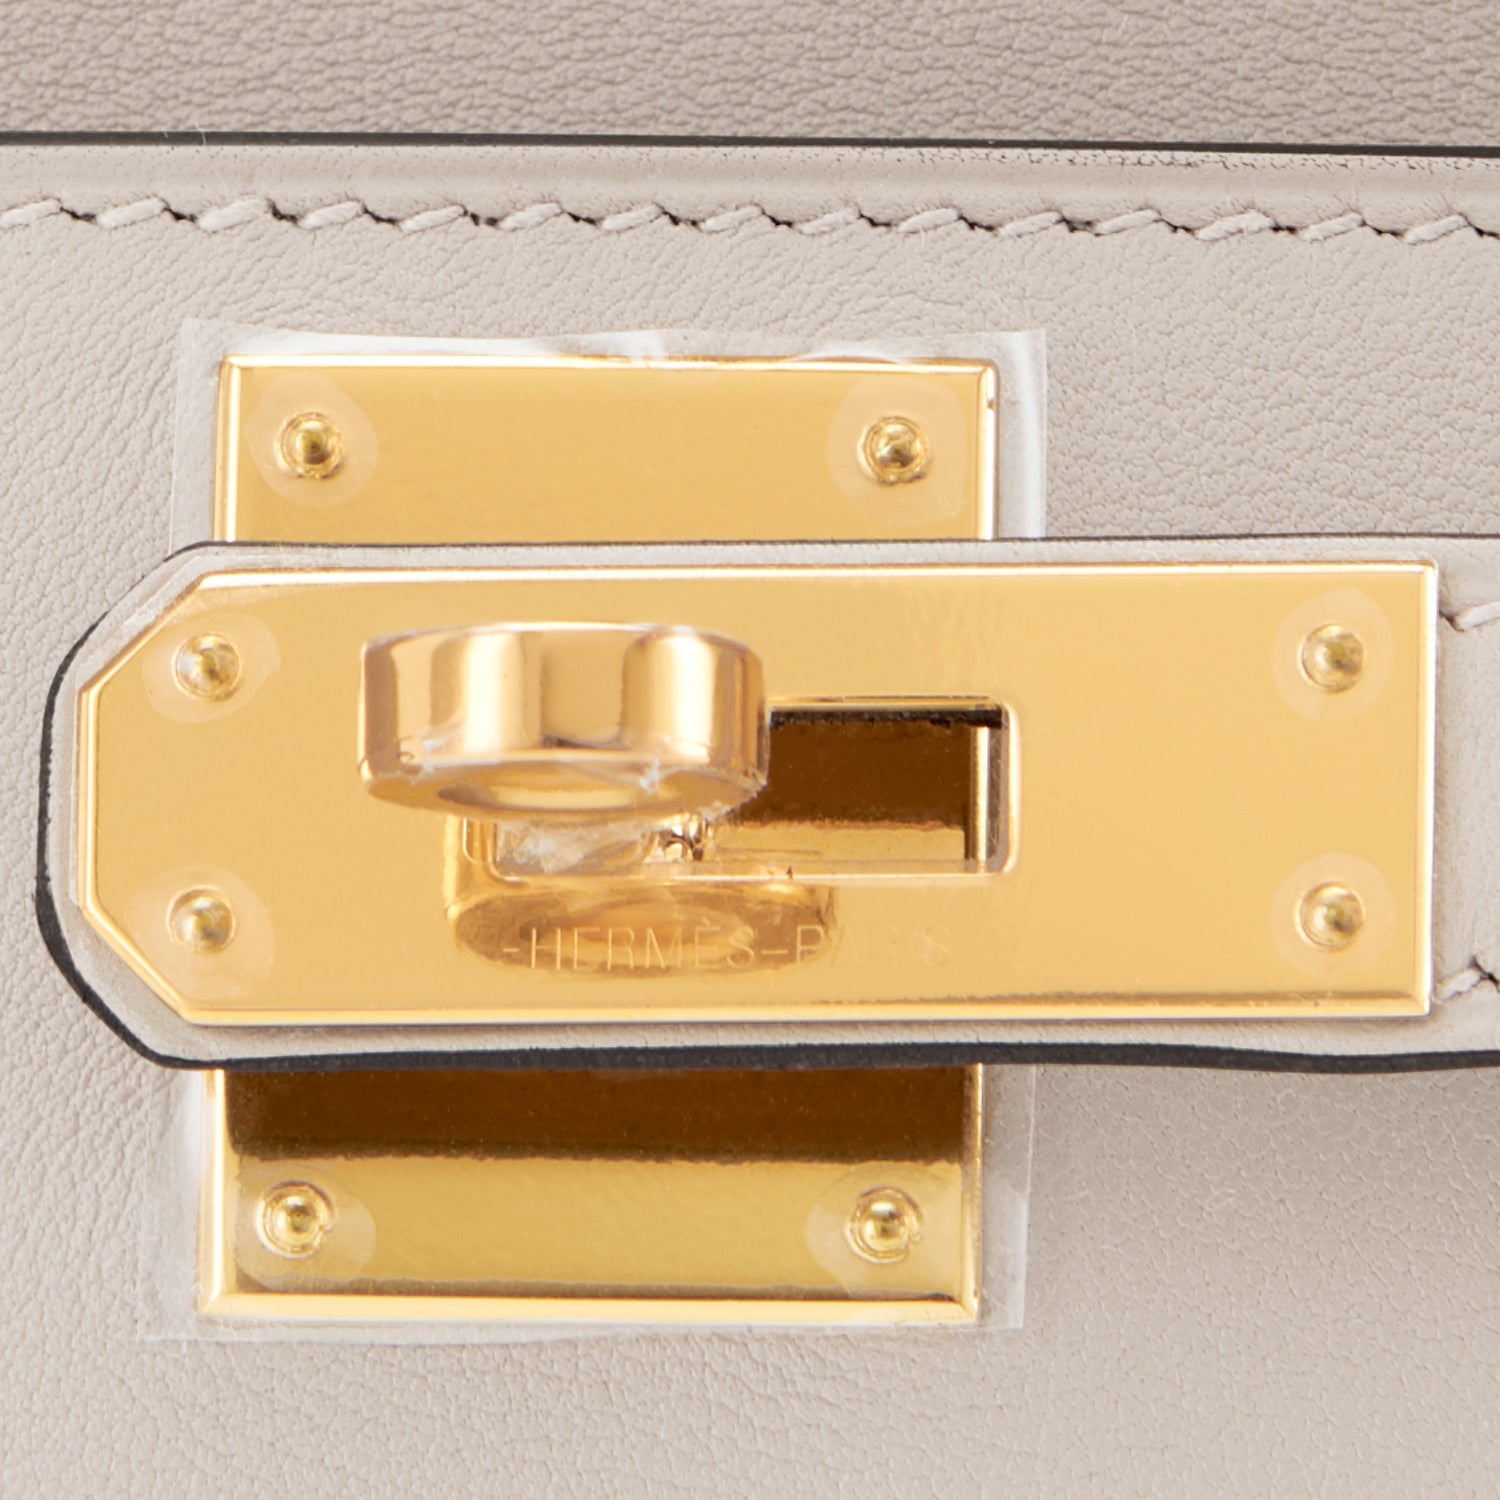 A CRAIE SWIFT LEATHER KELLY POCHETTE WITH GOLD HARDWARE